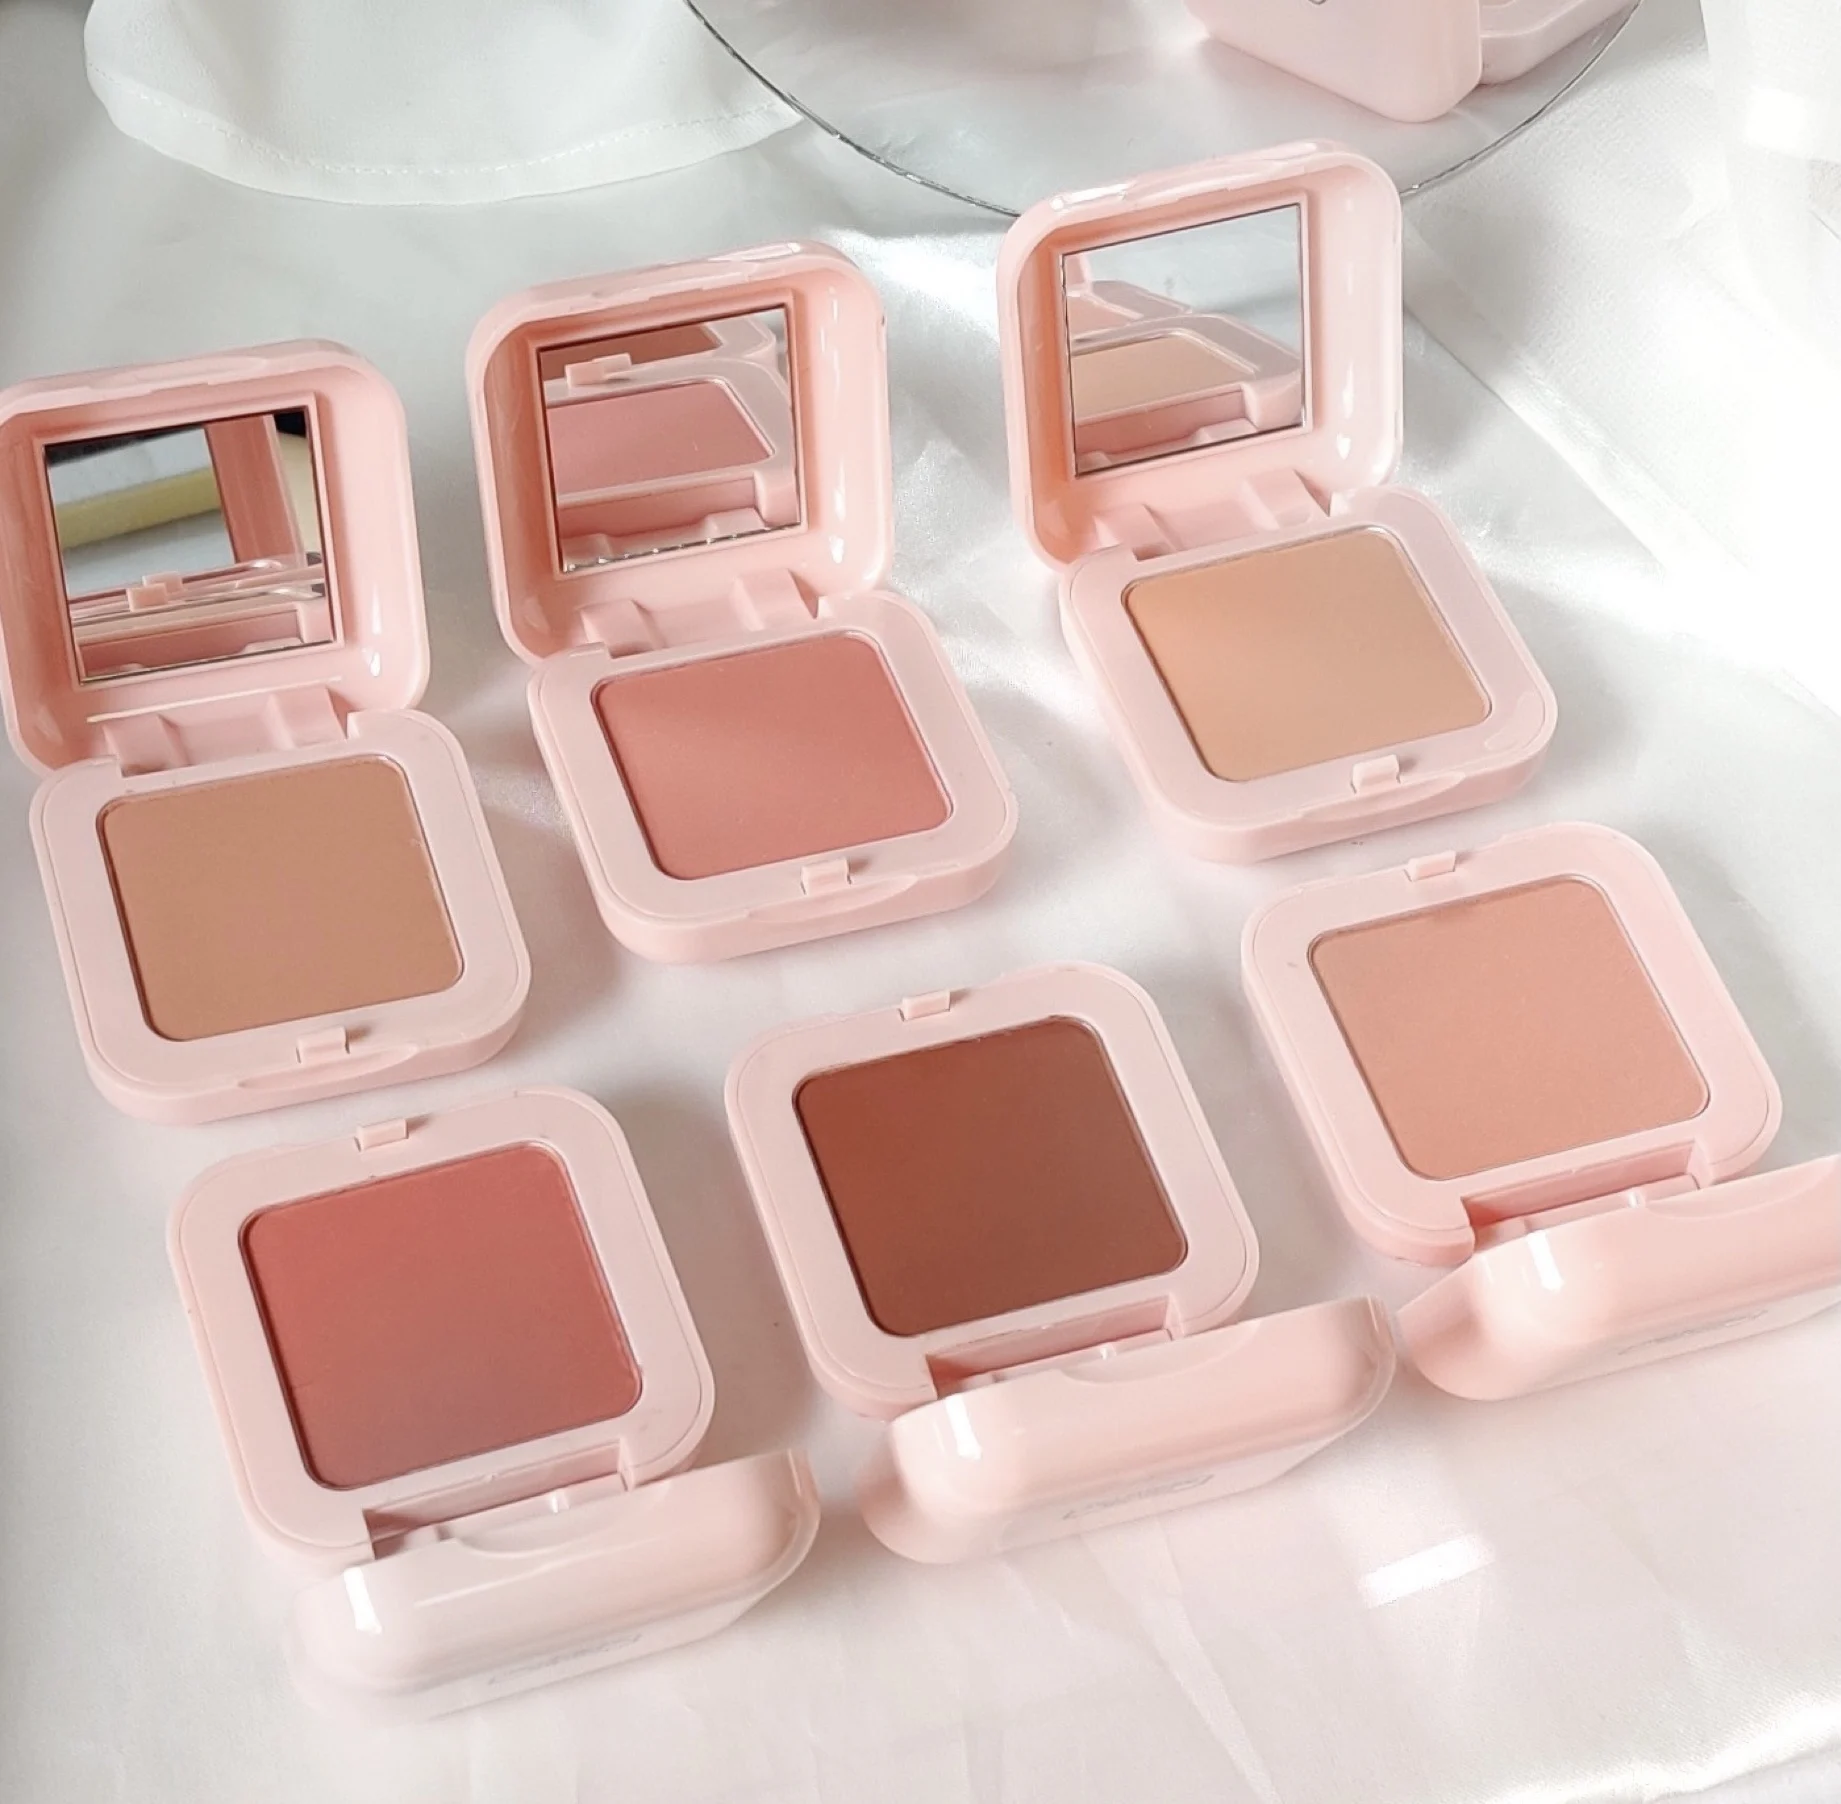 

New Arrivals Cheap Price Pink Packing 6 colors Cream Blush Custom Logo Face Single Blusher private label